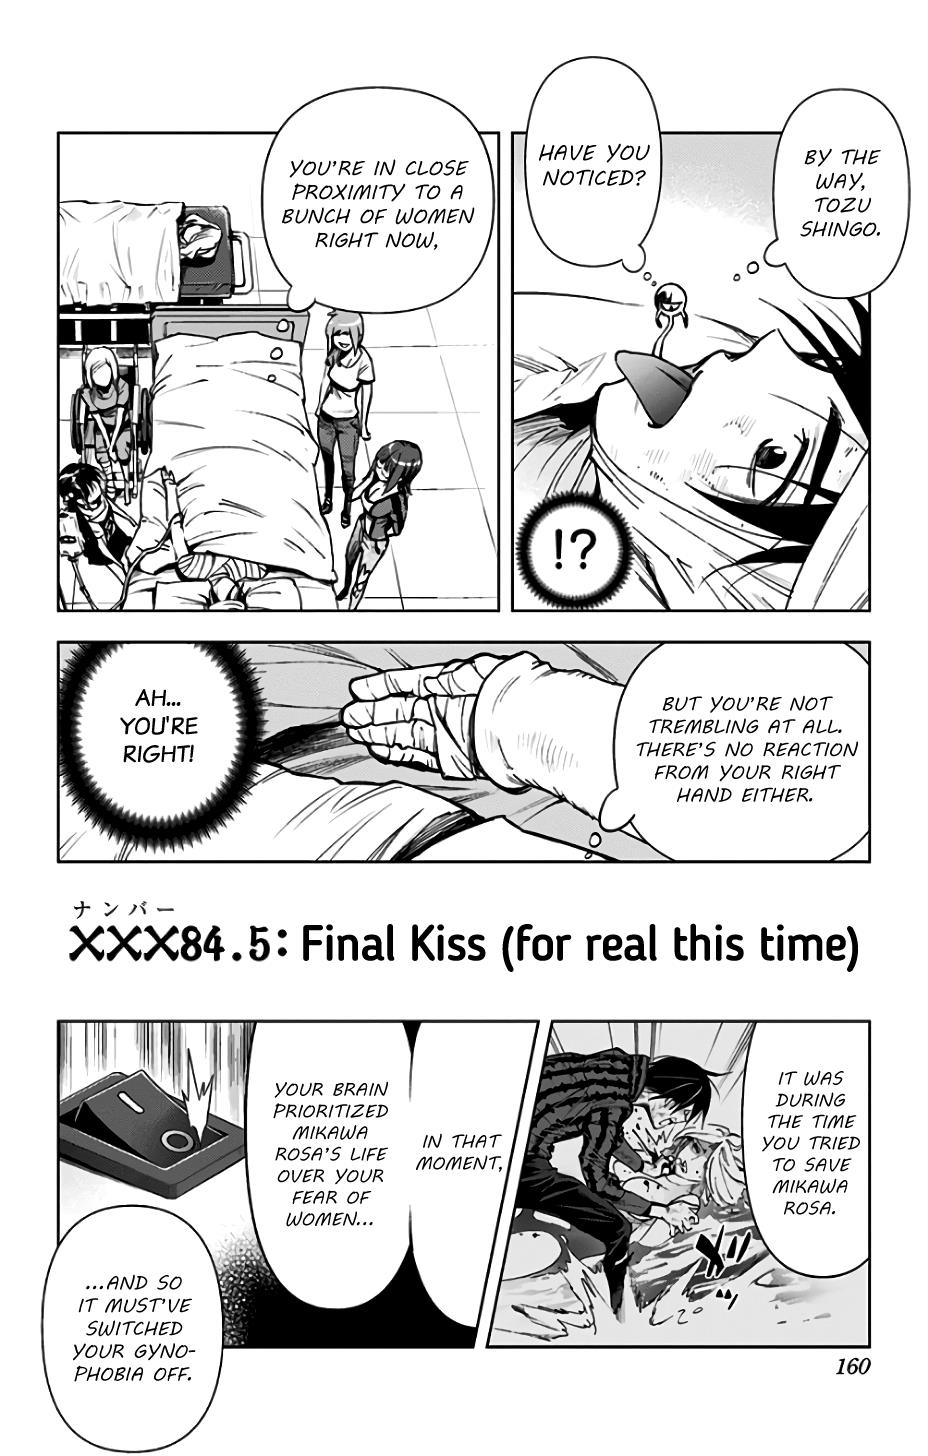 Kiss X Death Vol.7 Chapter 84.5: Final Kiss (For Real This Time) - Picture 1